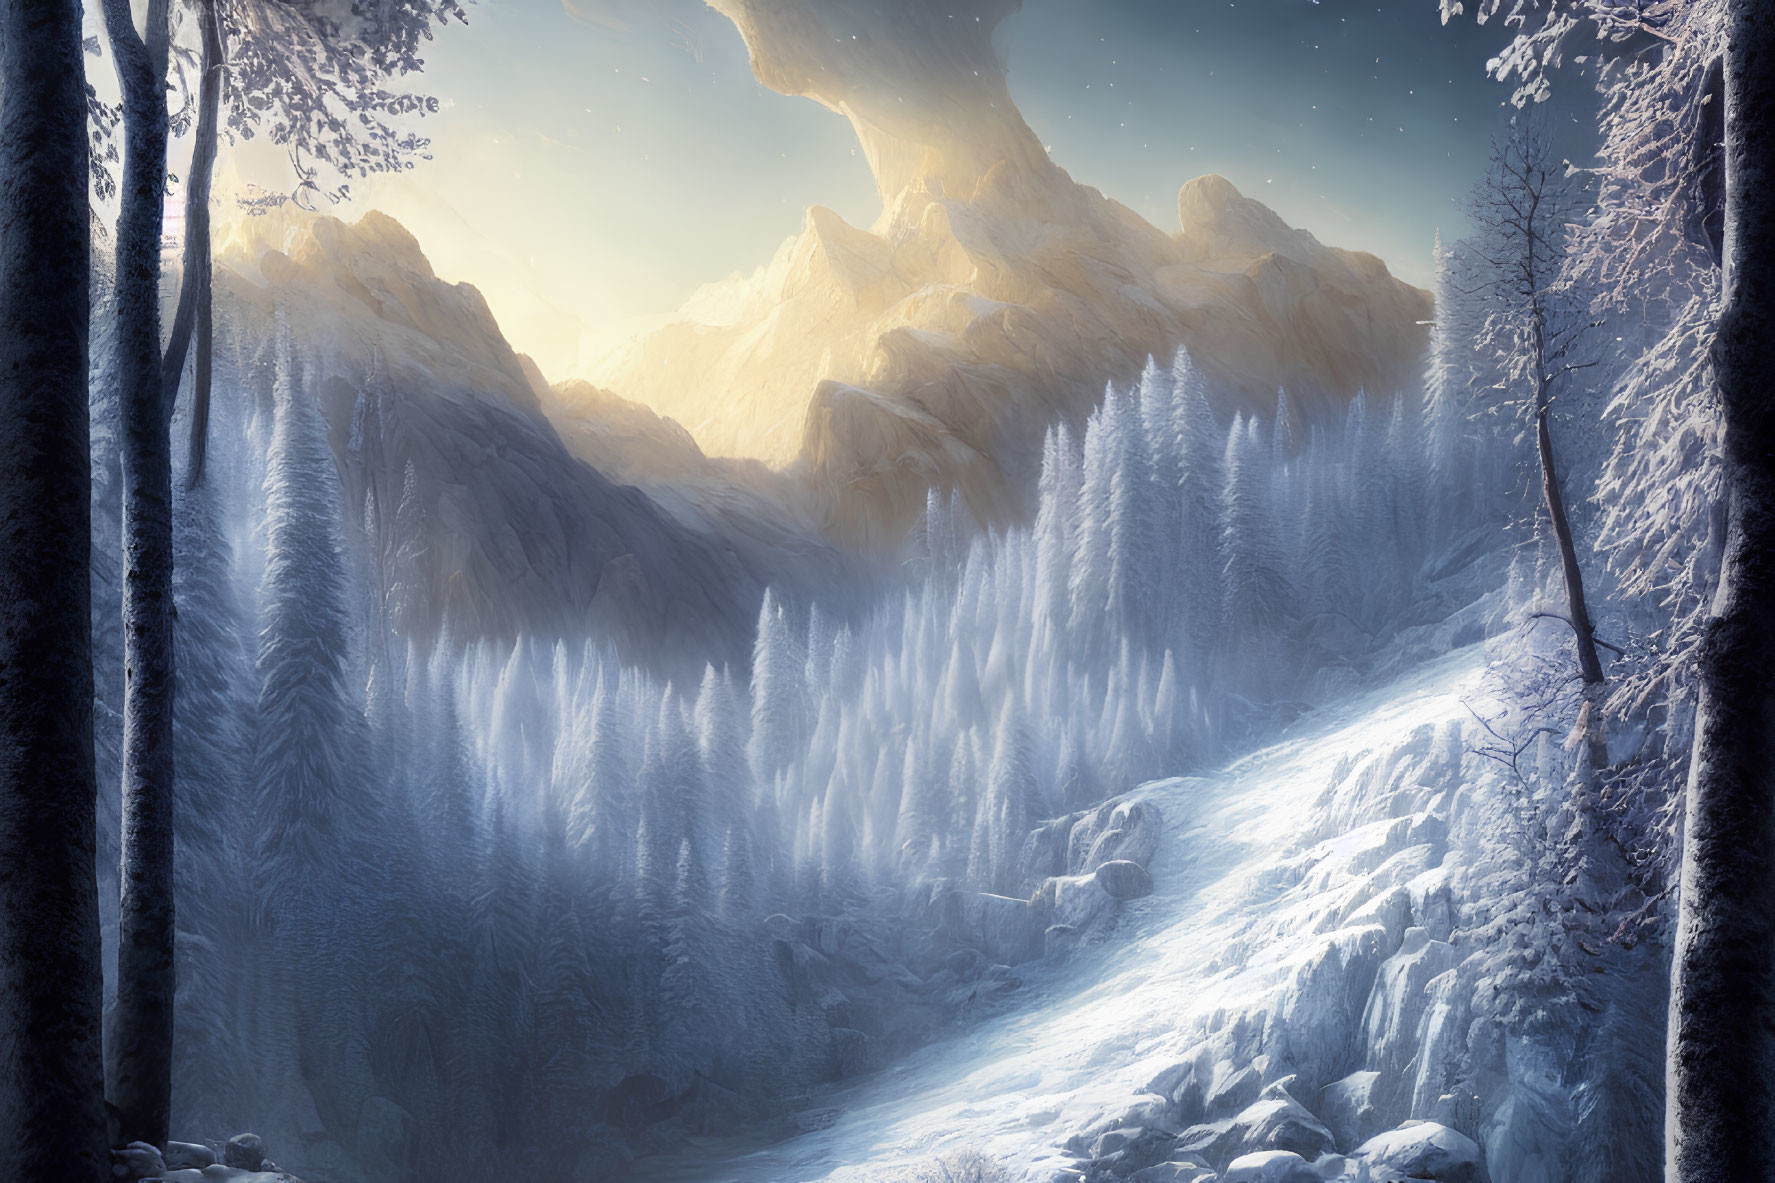 Snowy forest path towards sunlit mountains under starry sky